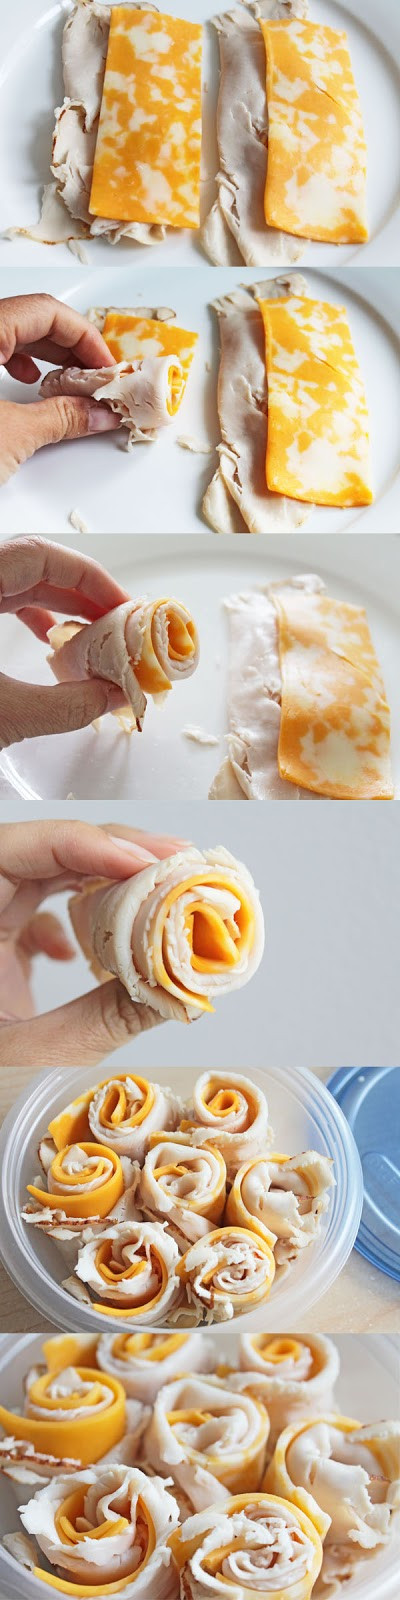 Simple Healthy Snacks
 Easy to Make Snacks Turkey and Cheese Rolls Recipe